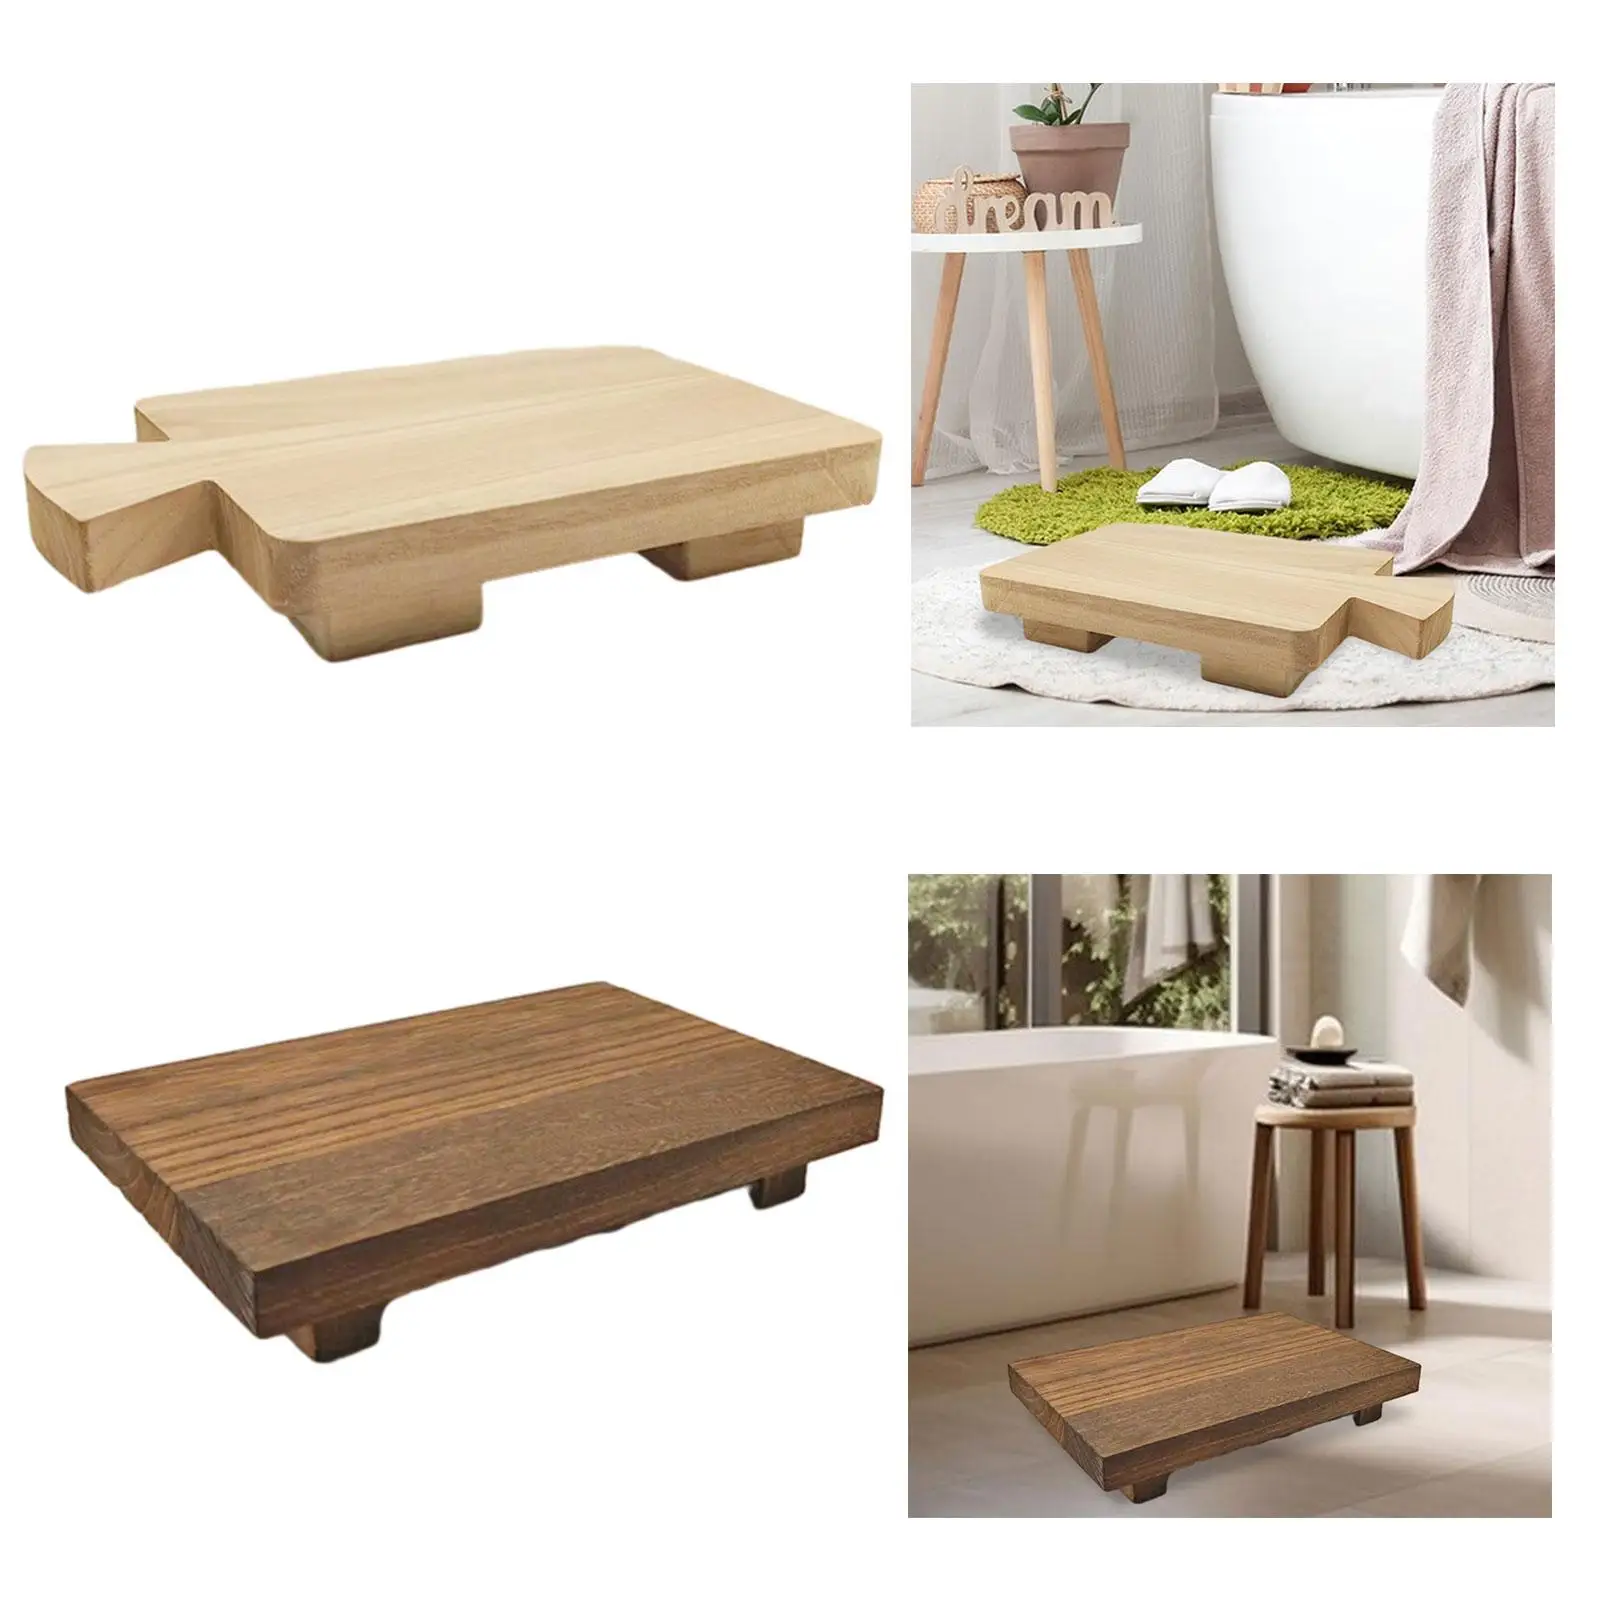 Wooden Pedestal Stand Footed Tray Farmhouse Rustic Wood Riser for Display Soap Tray for Wedding Party Kitchen Counter